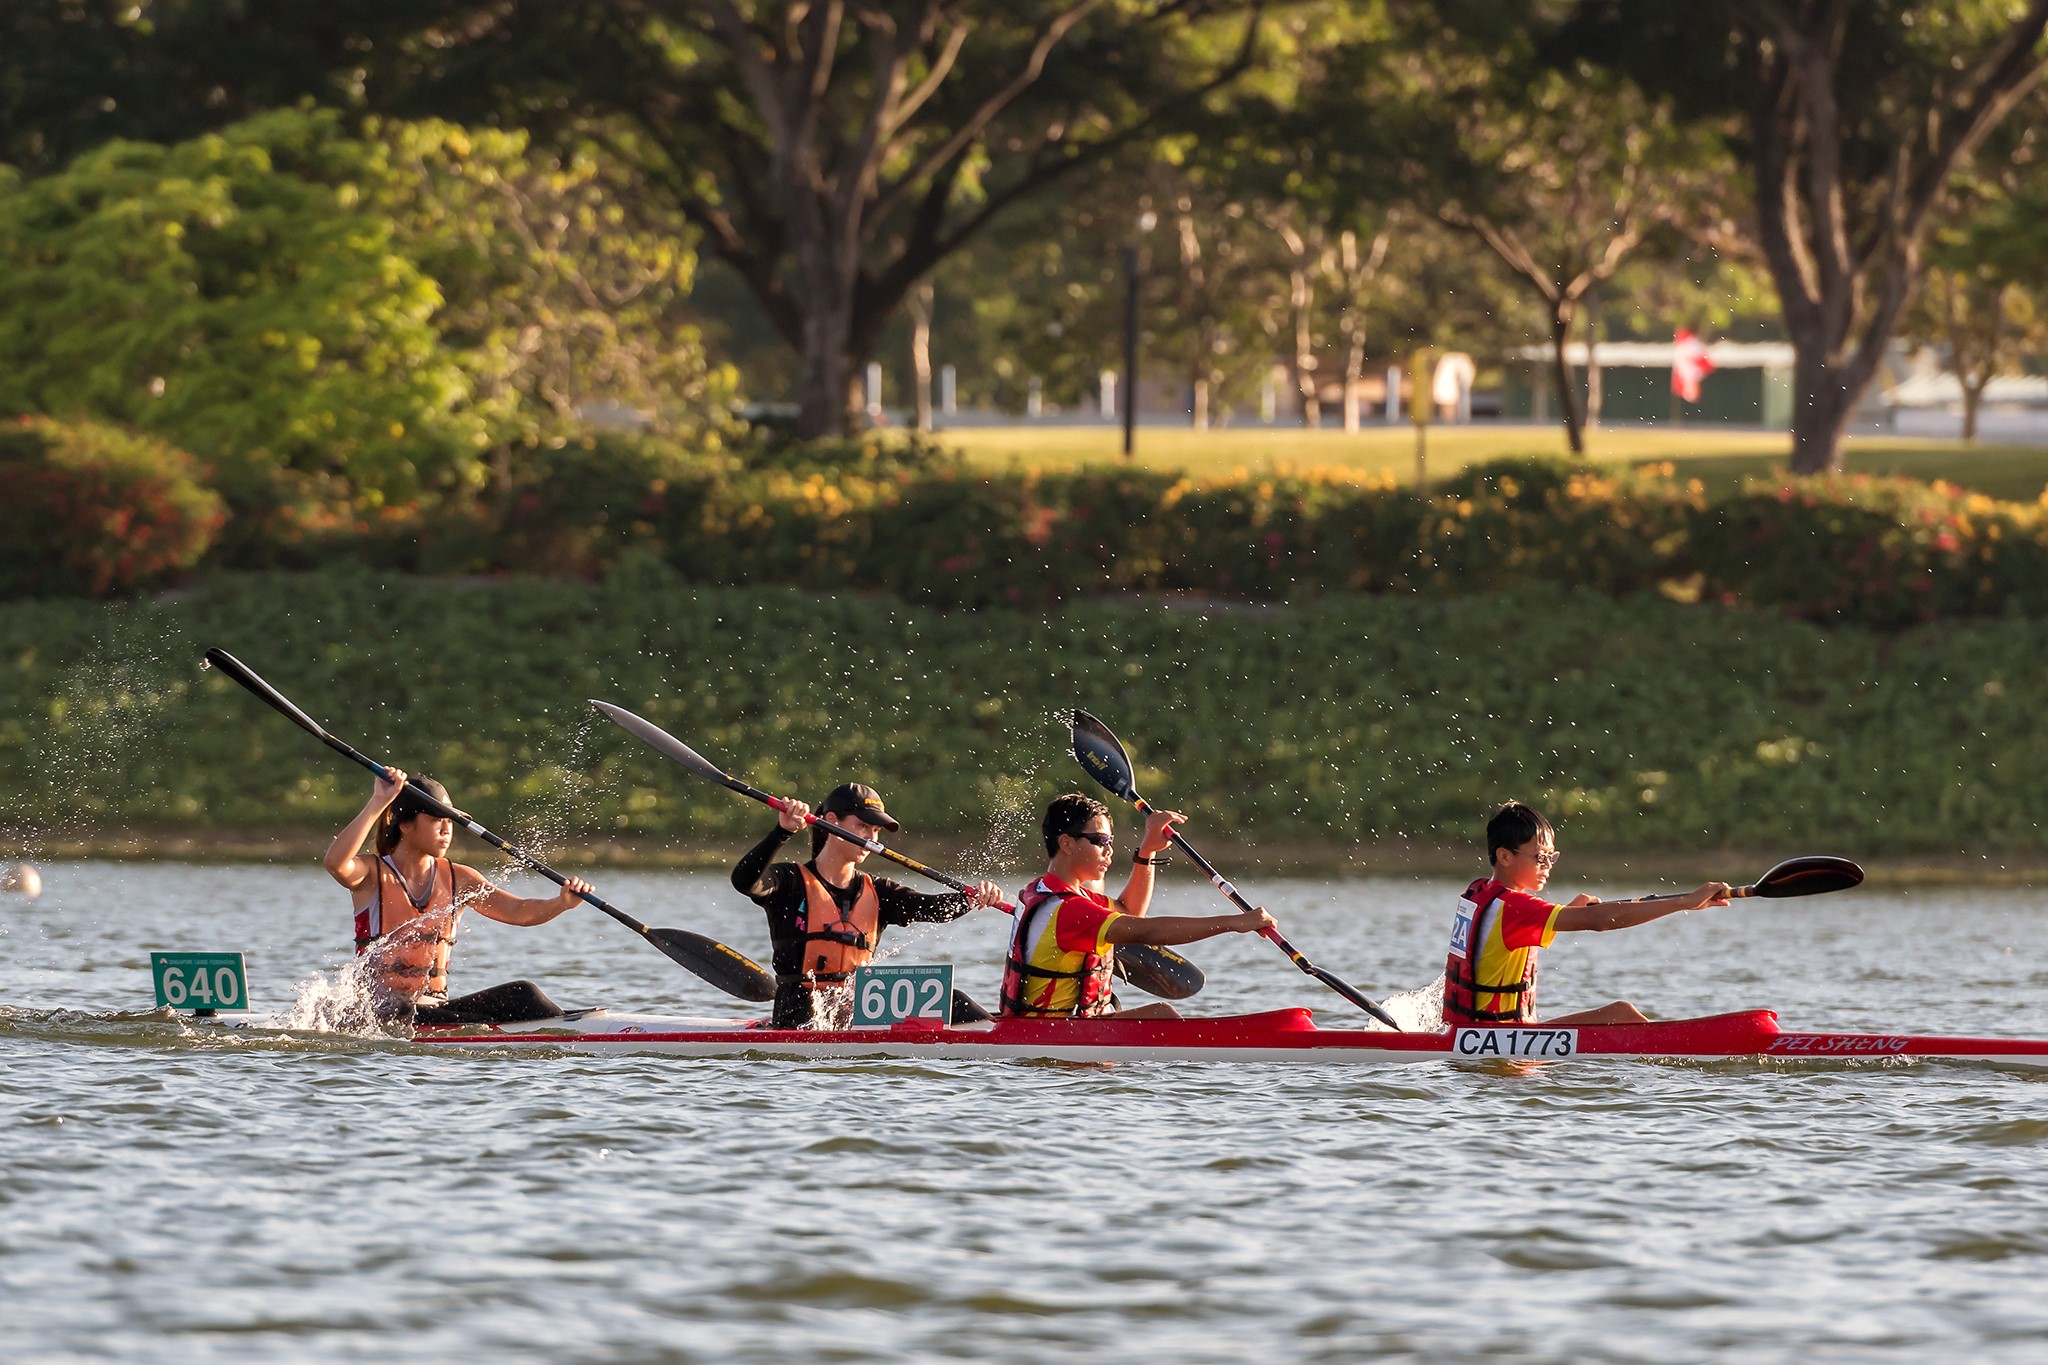 2021 Selection for National Junior/Development Team & U14s Joint Recruitment with ActiveSG Canoe Academy